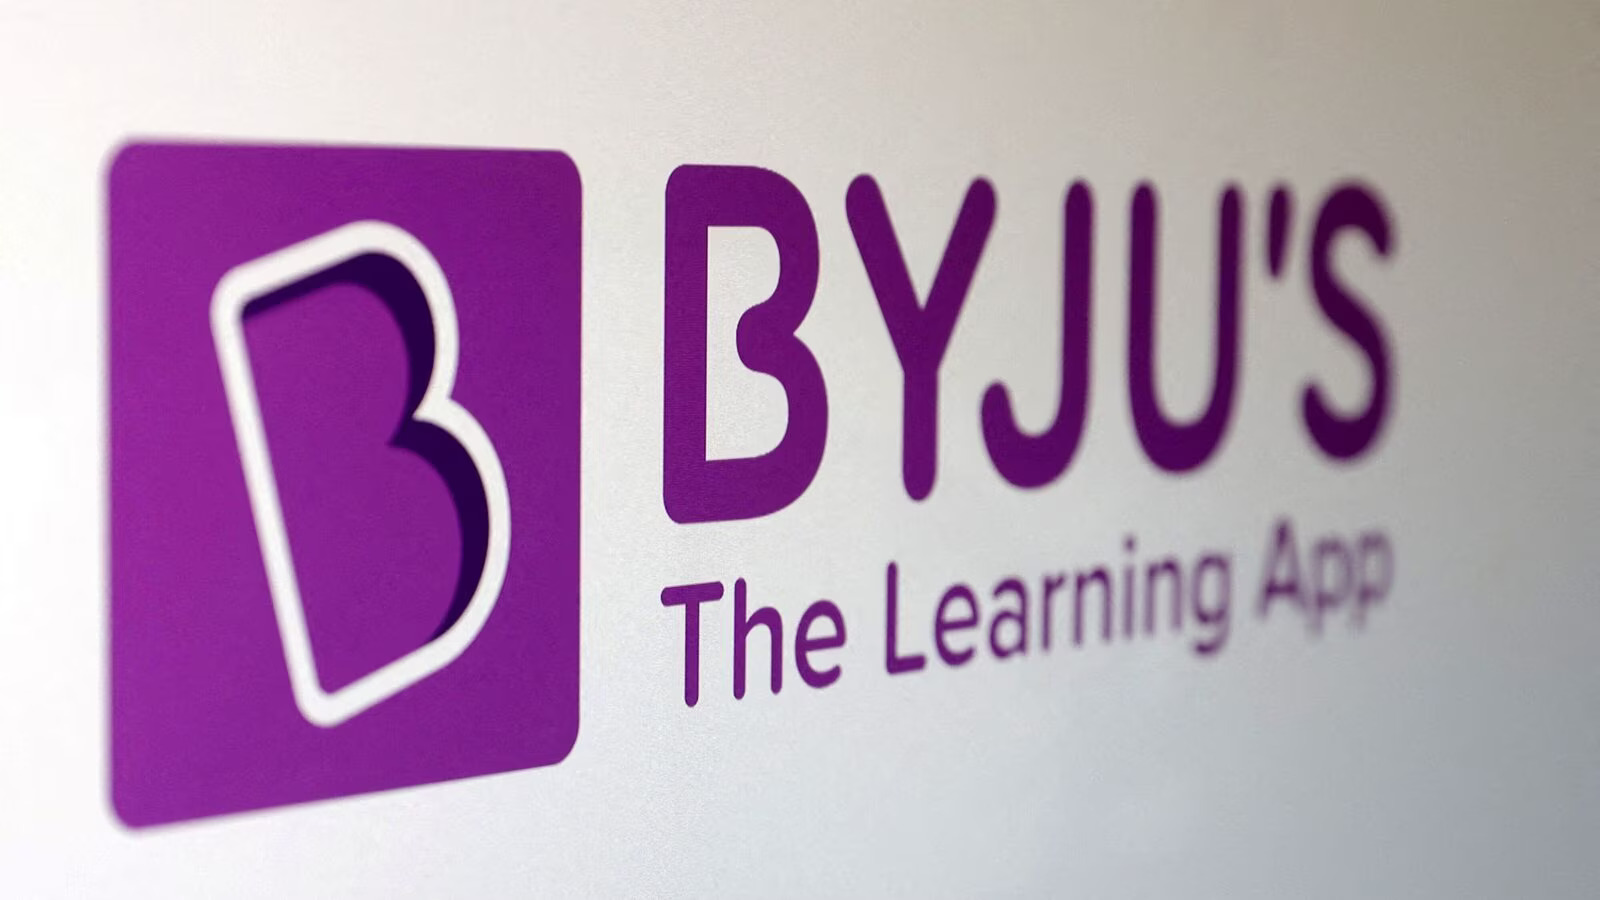 Educational Advertising Strategy - Byjus